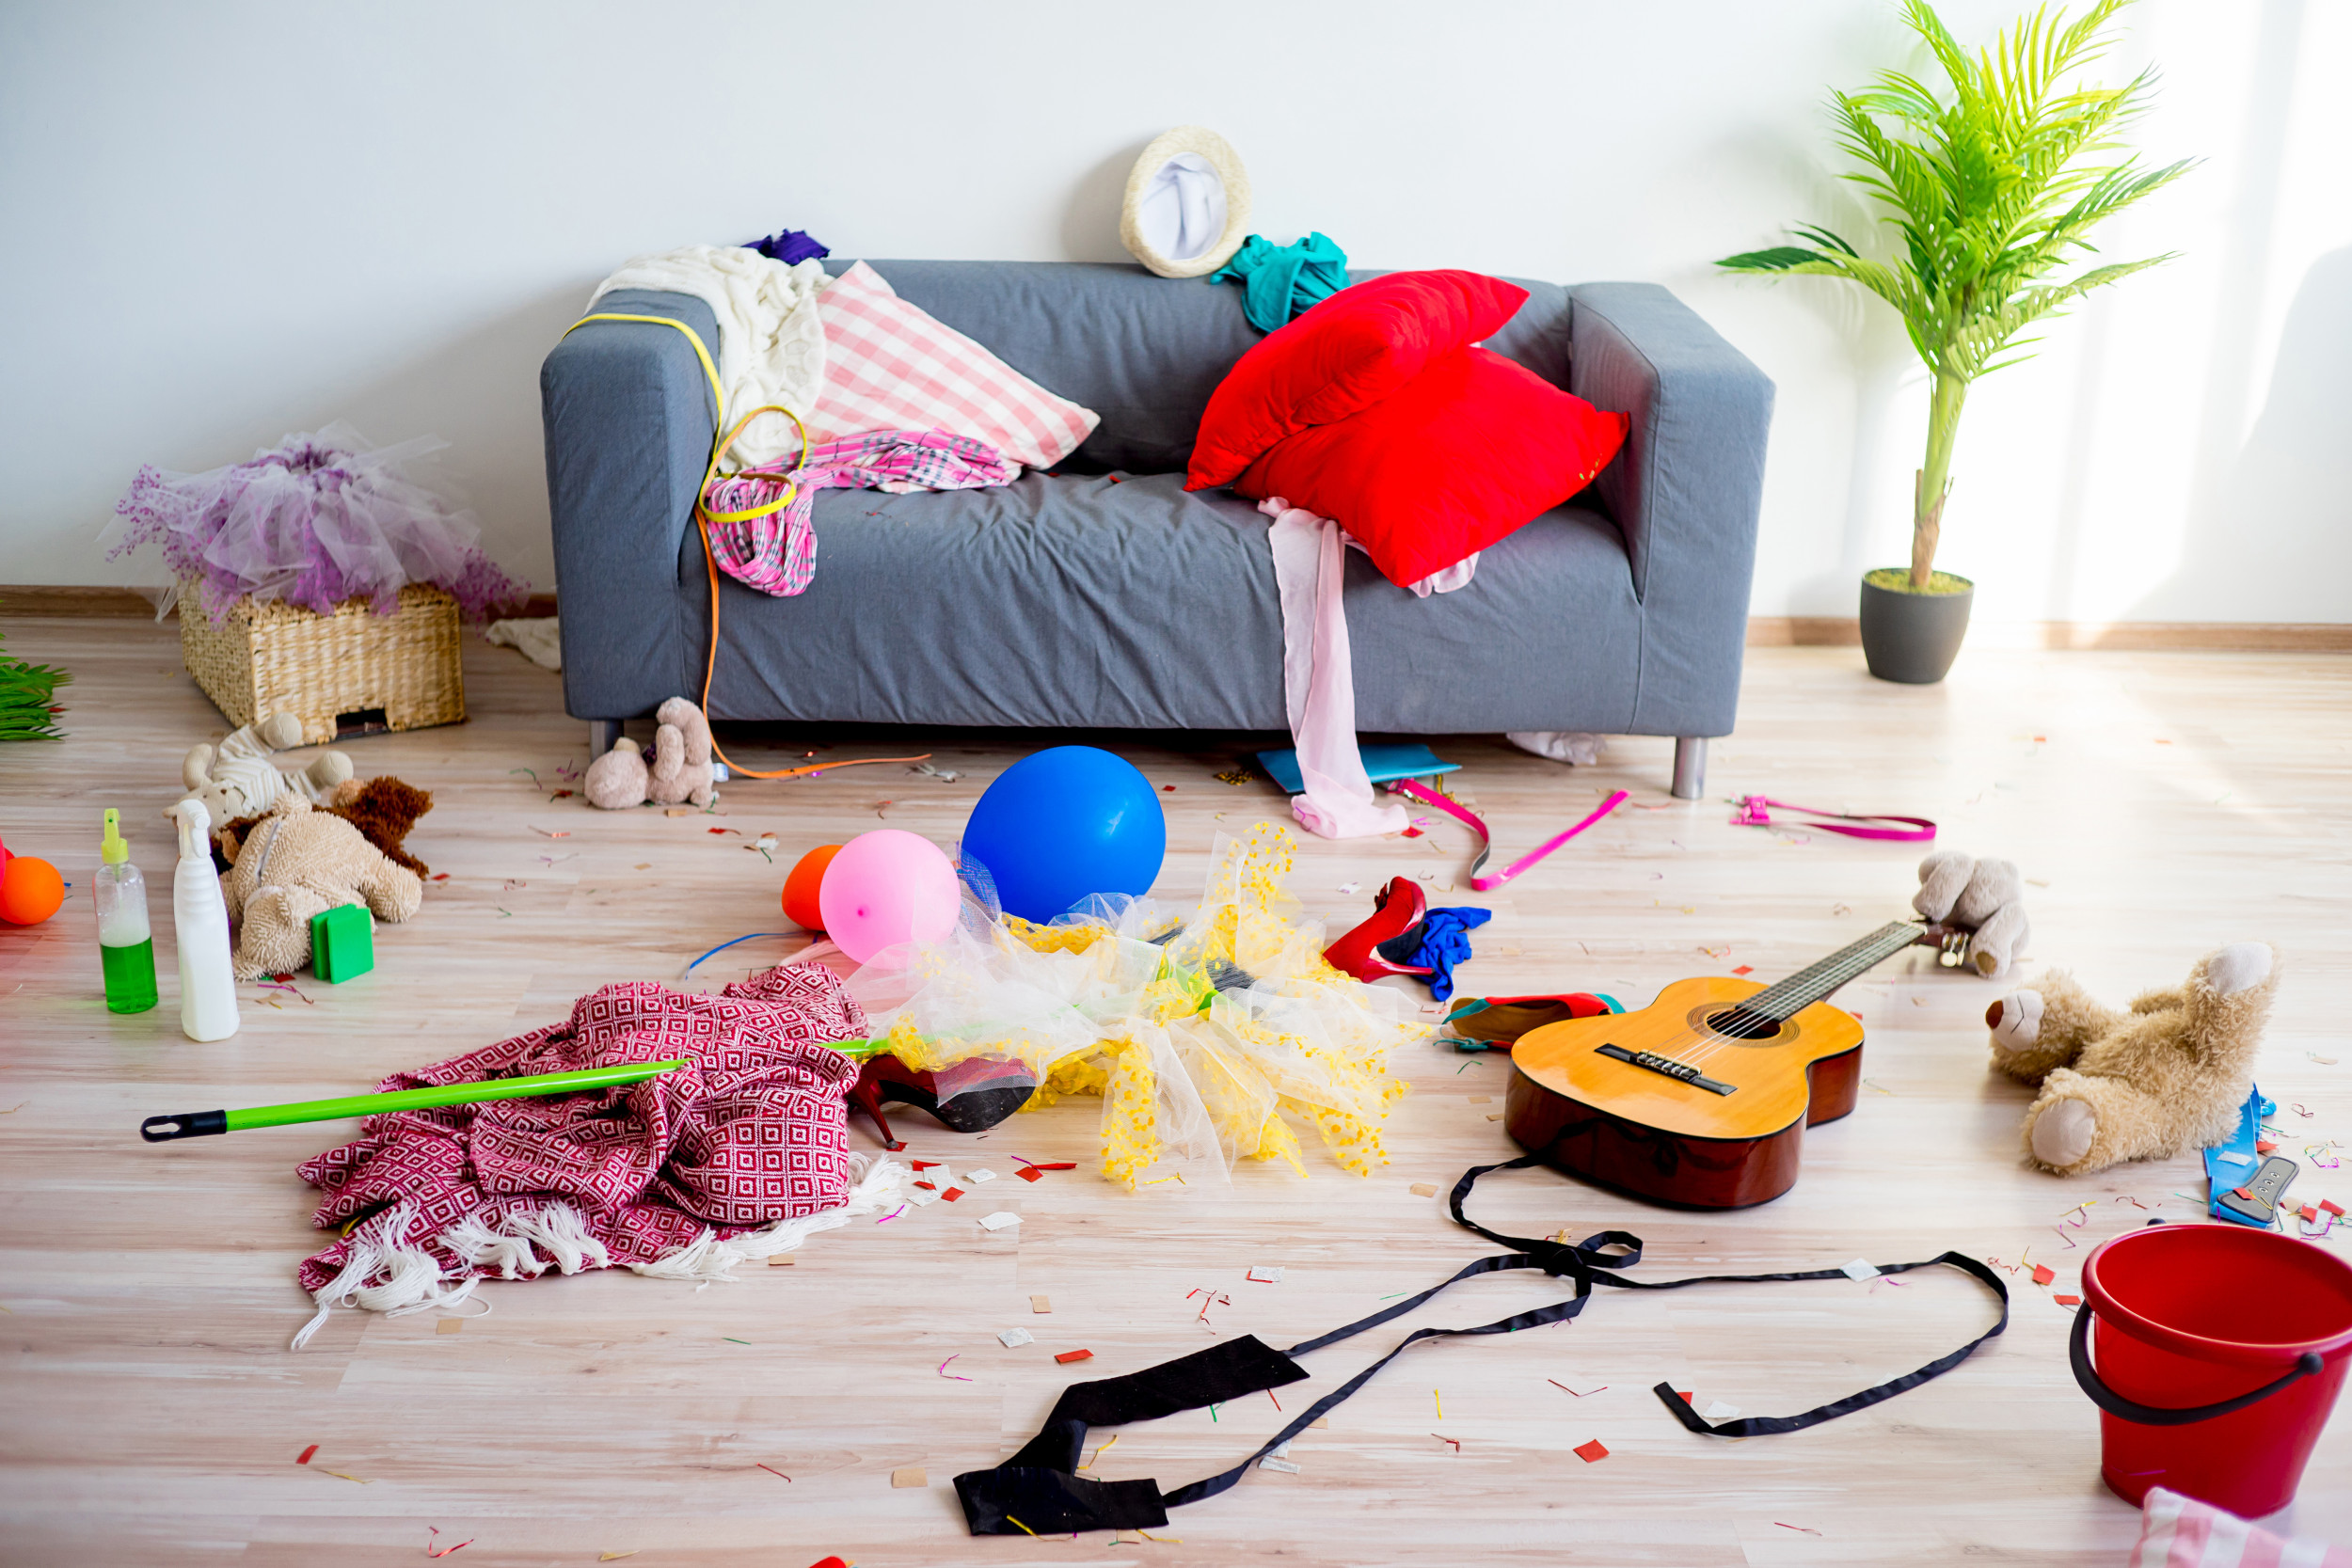 messy living room with toys